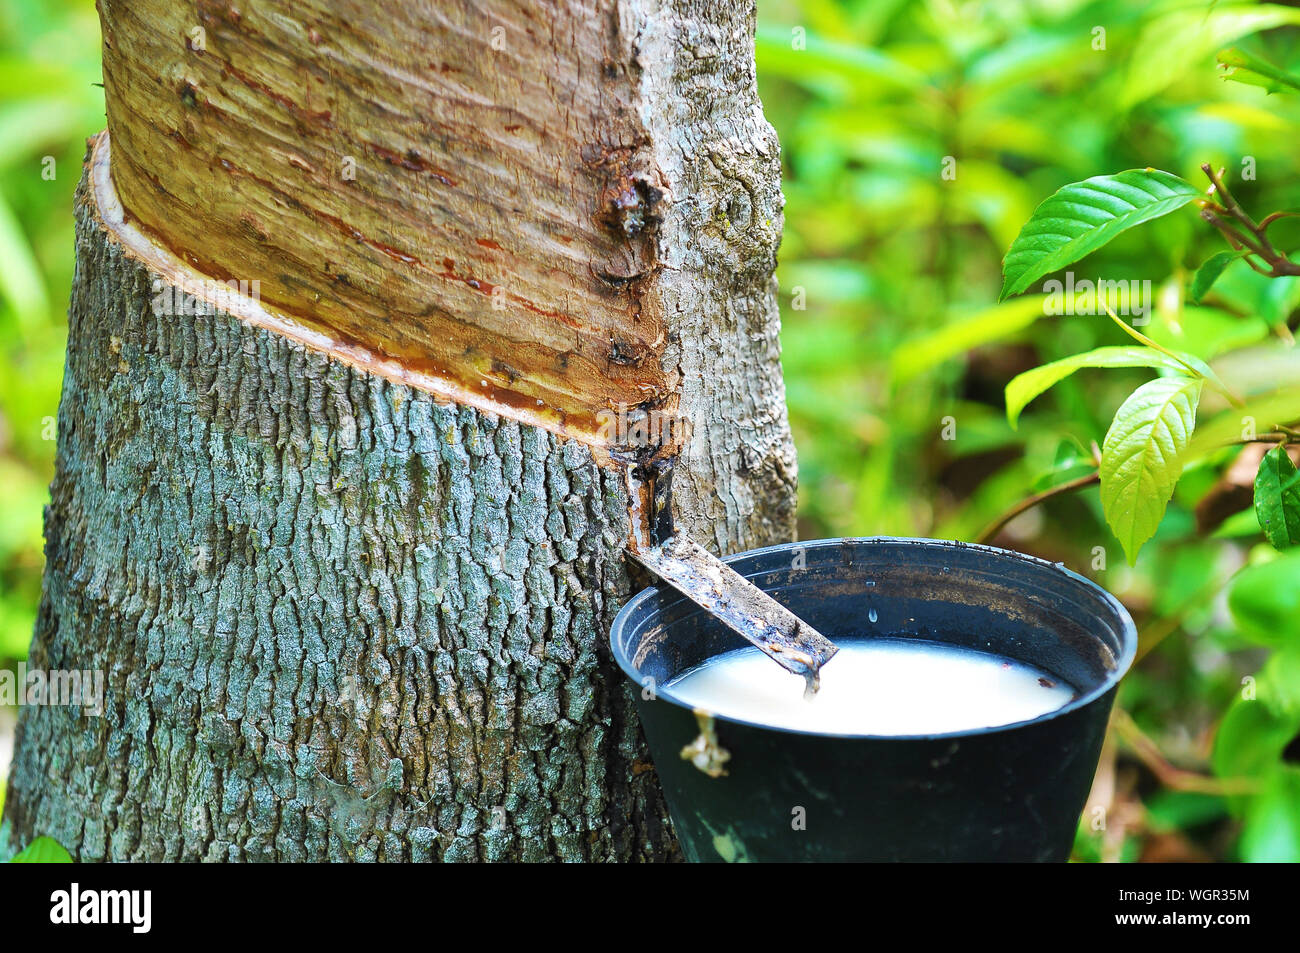 Ruimteschip Voorbereiding Beven Close-up Of Latex Collecting In Bucket Attached To Rubber Tree Stock Photo  - Alamy